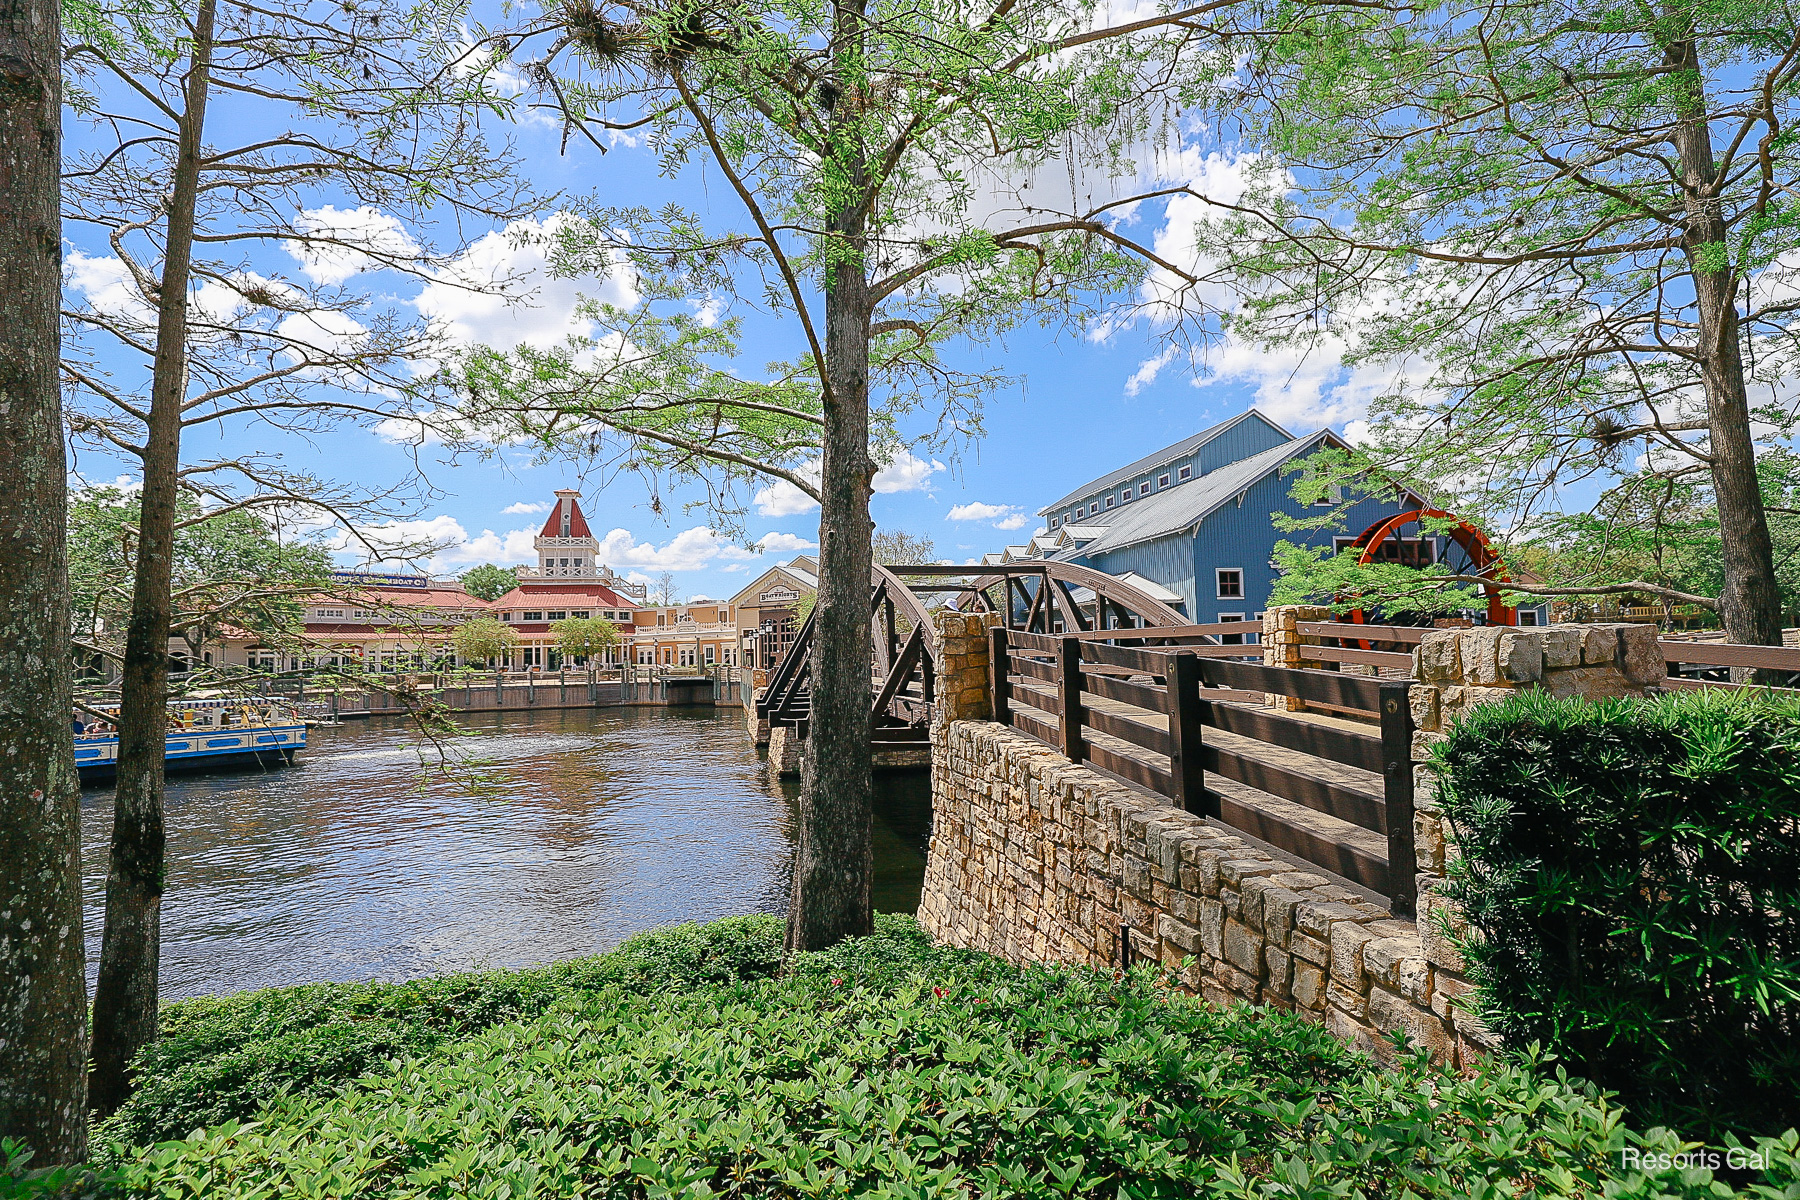 a pretty view of Port Orleans Riverside in the Spring